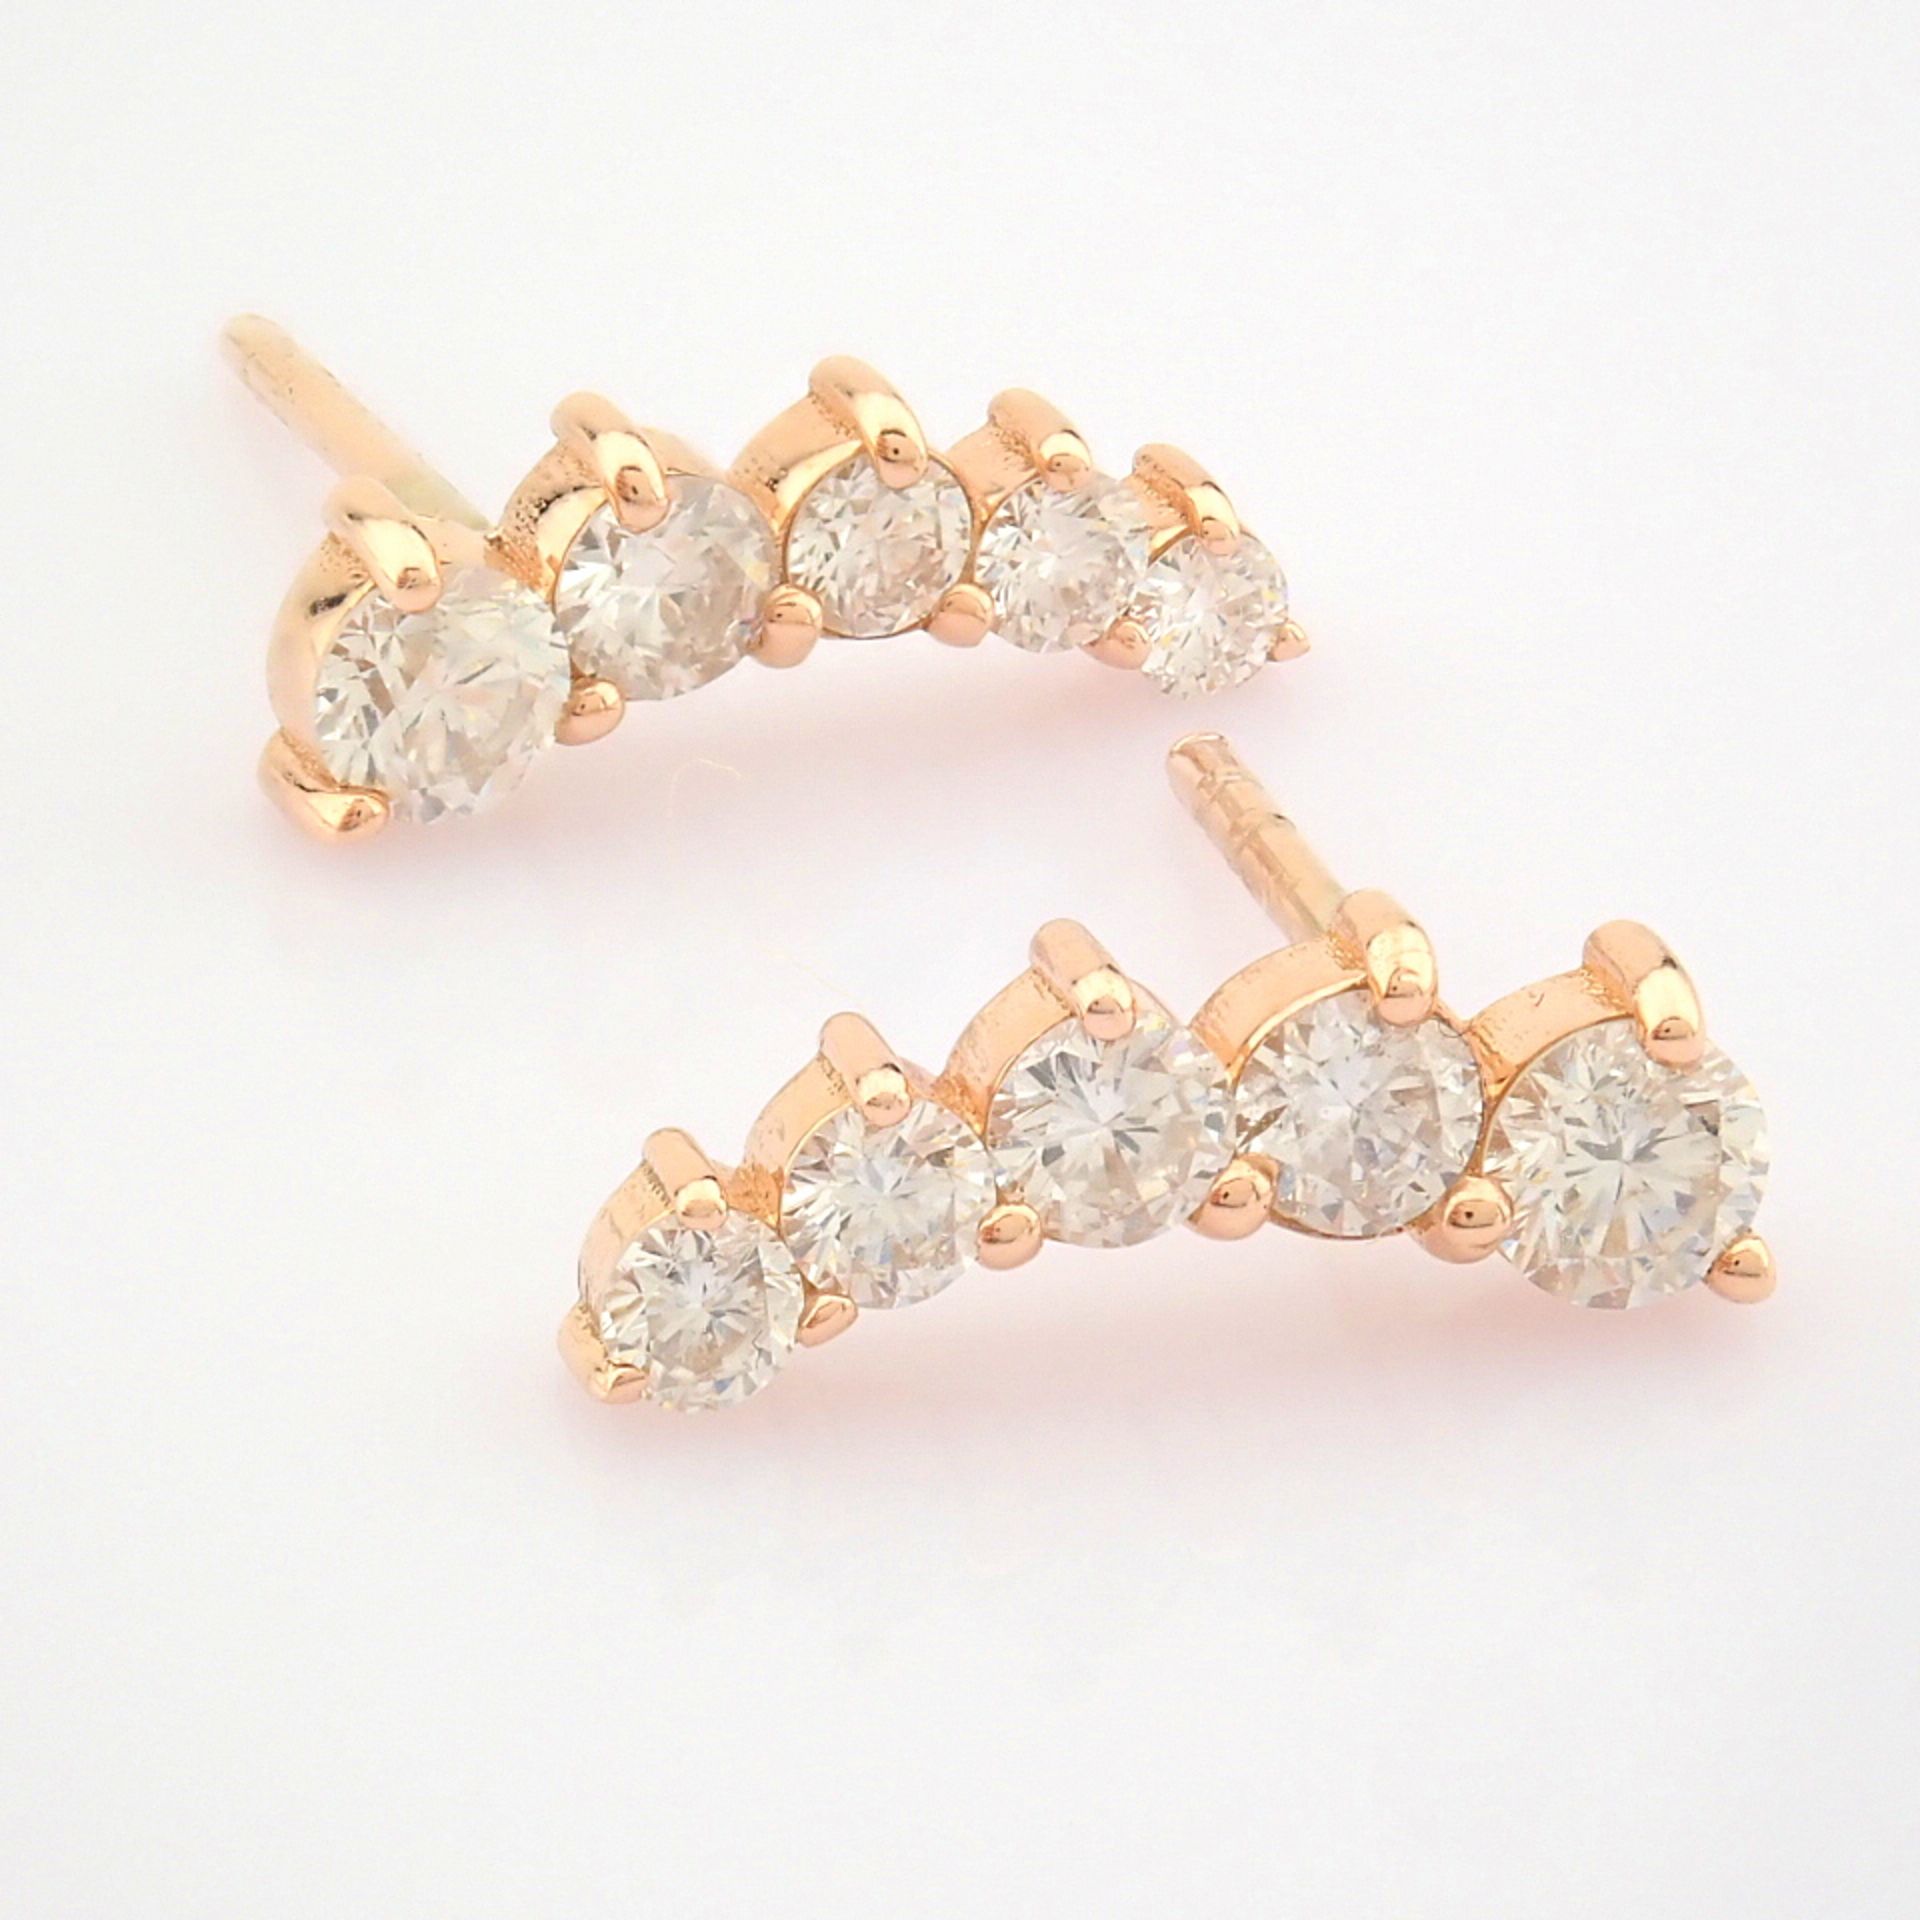 Certificated 14K Rose/Pink Gold Diamond Earring (Total 0.53 ct Stone) - Image 6 of 7